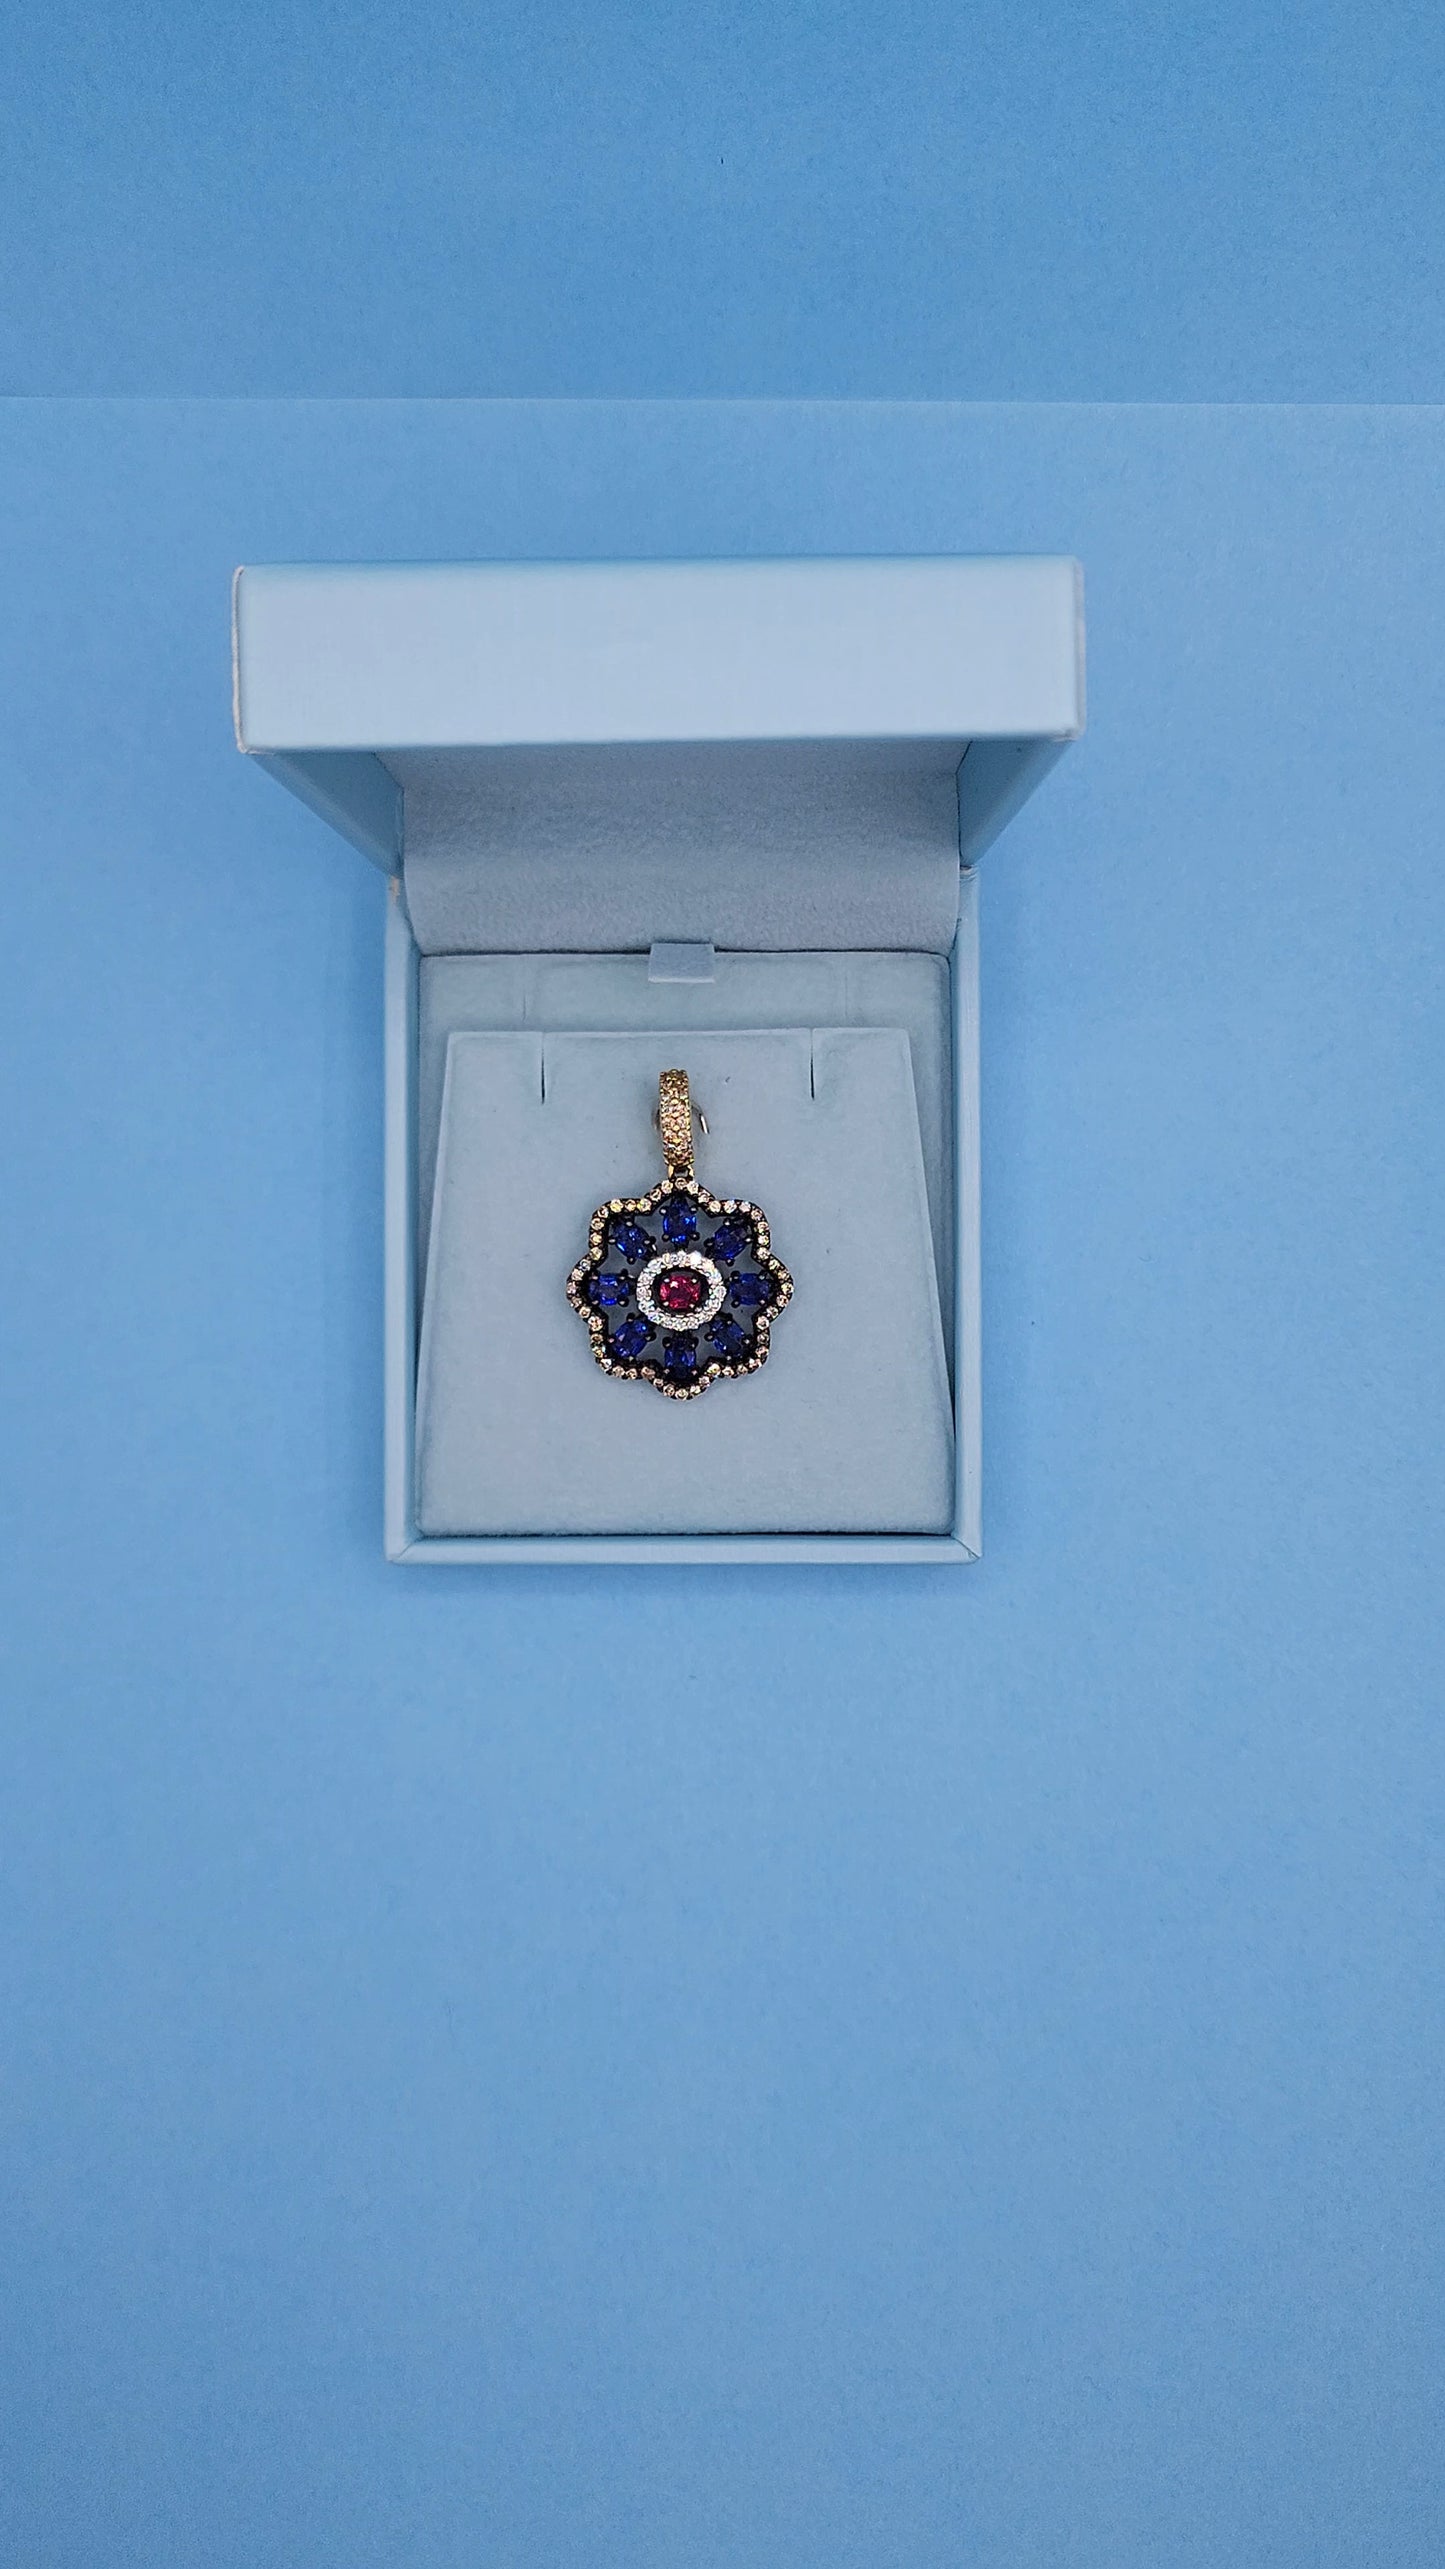 Unique Floral Motif Pendant with High Quality Sapphire, Ruby, White and Champagne Diamonds in 18k Gold and Black Rhodium